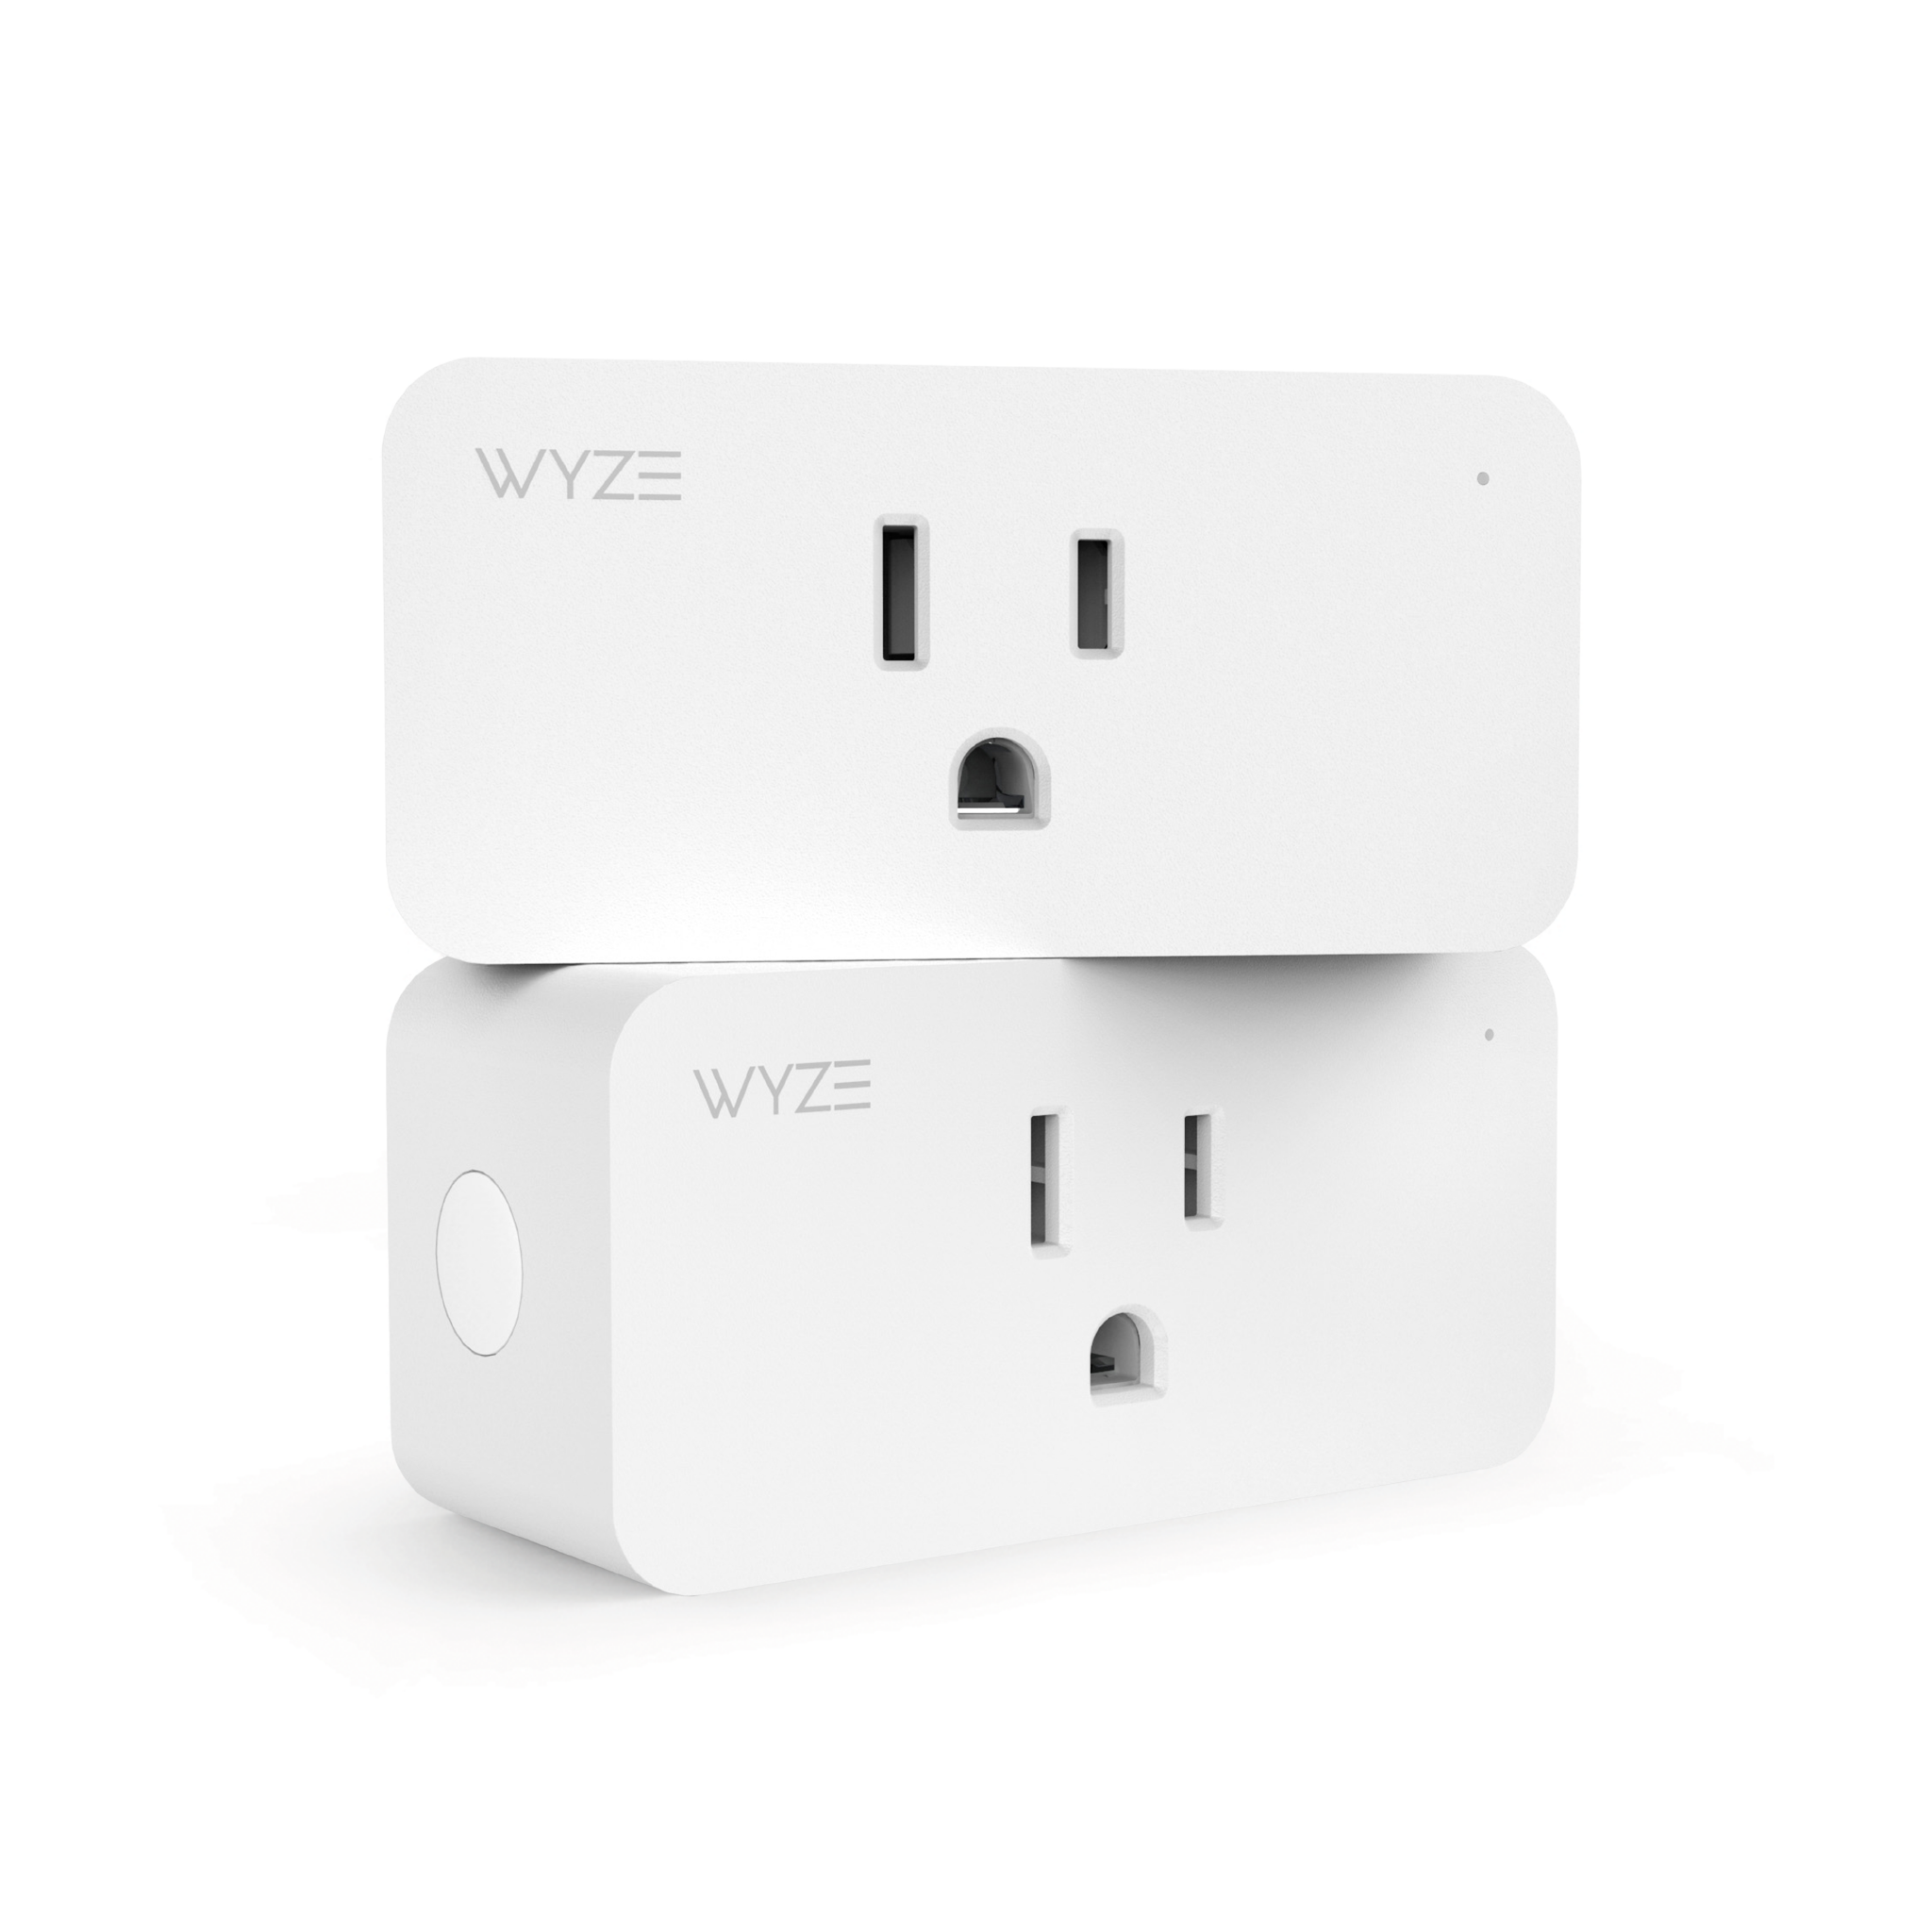 Smart Outdoor Single Outlet Plug Wi-Fi Bluetooth HubSpace 15AMP